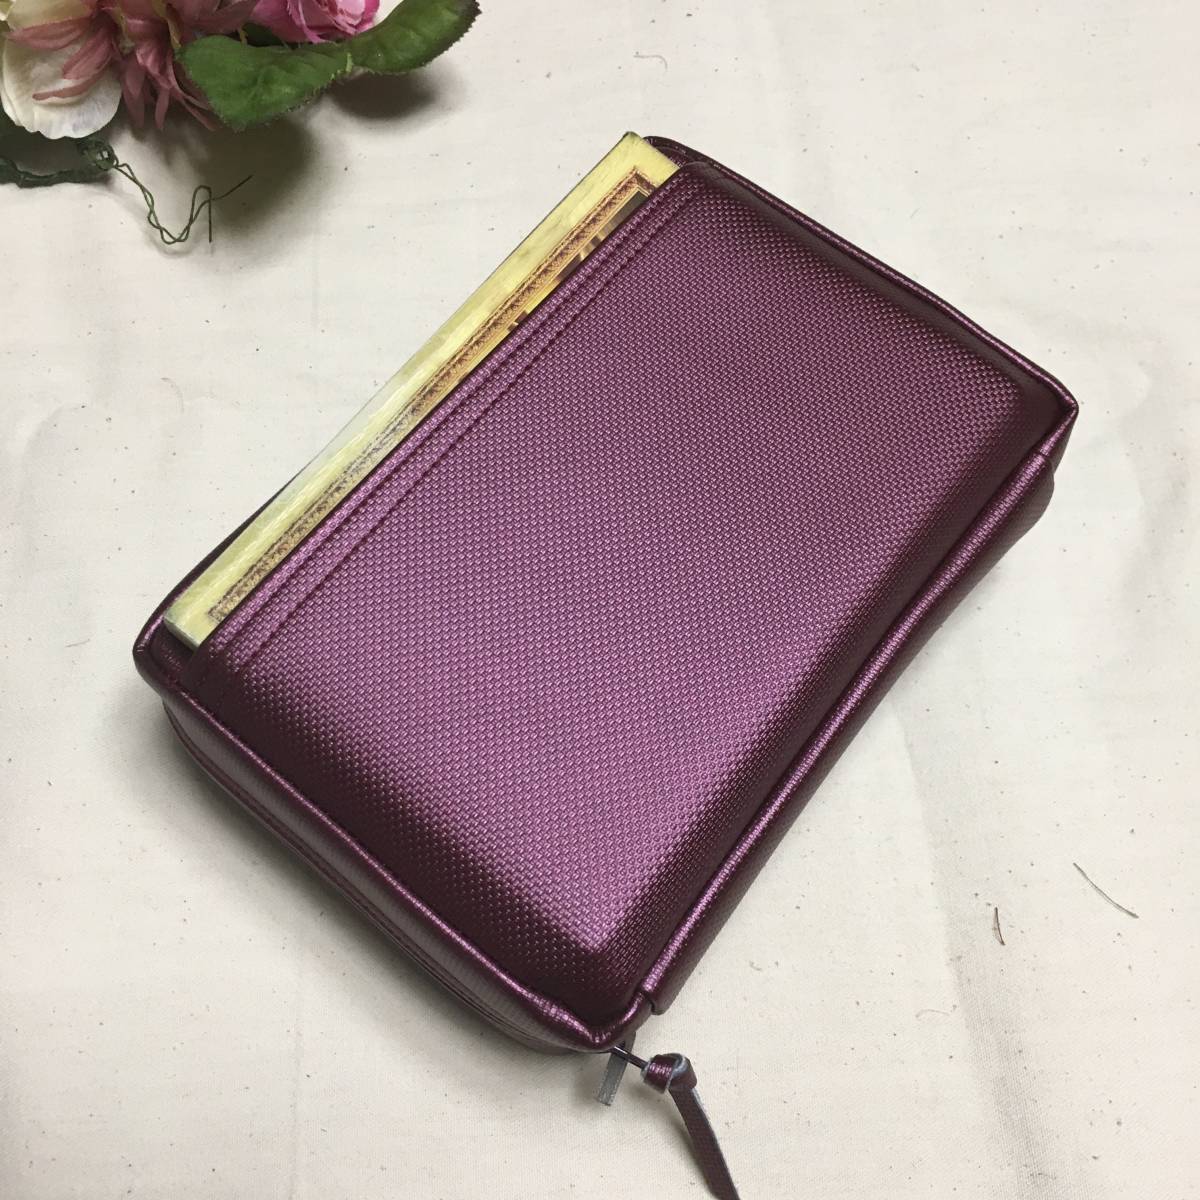 208* one side with pocket *2019 year modified . version * new world translation * normal version . paper cover * imitation leather wine * hand made 